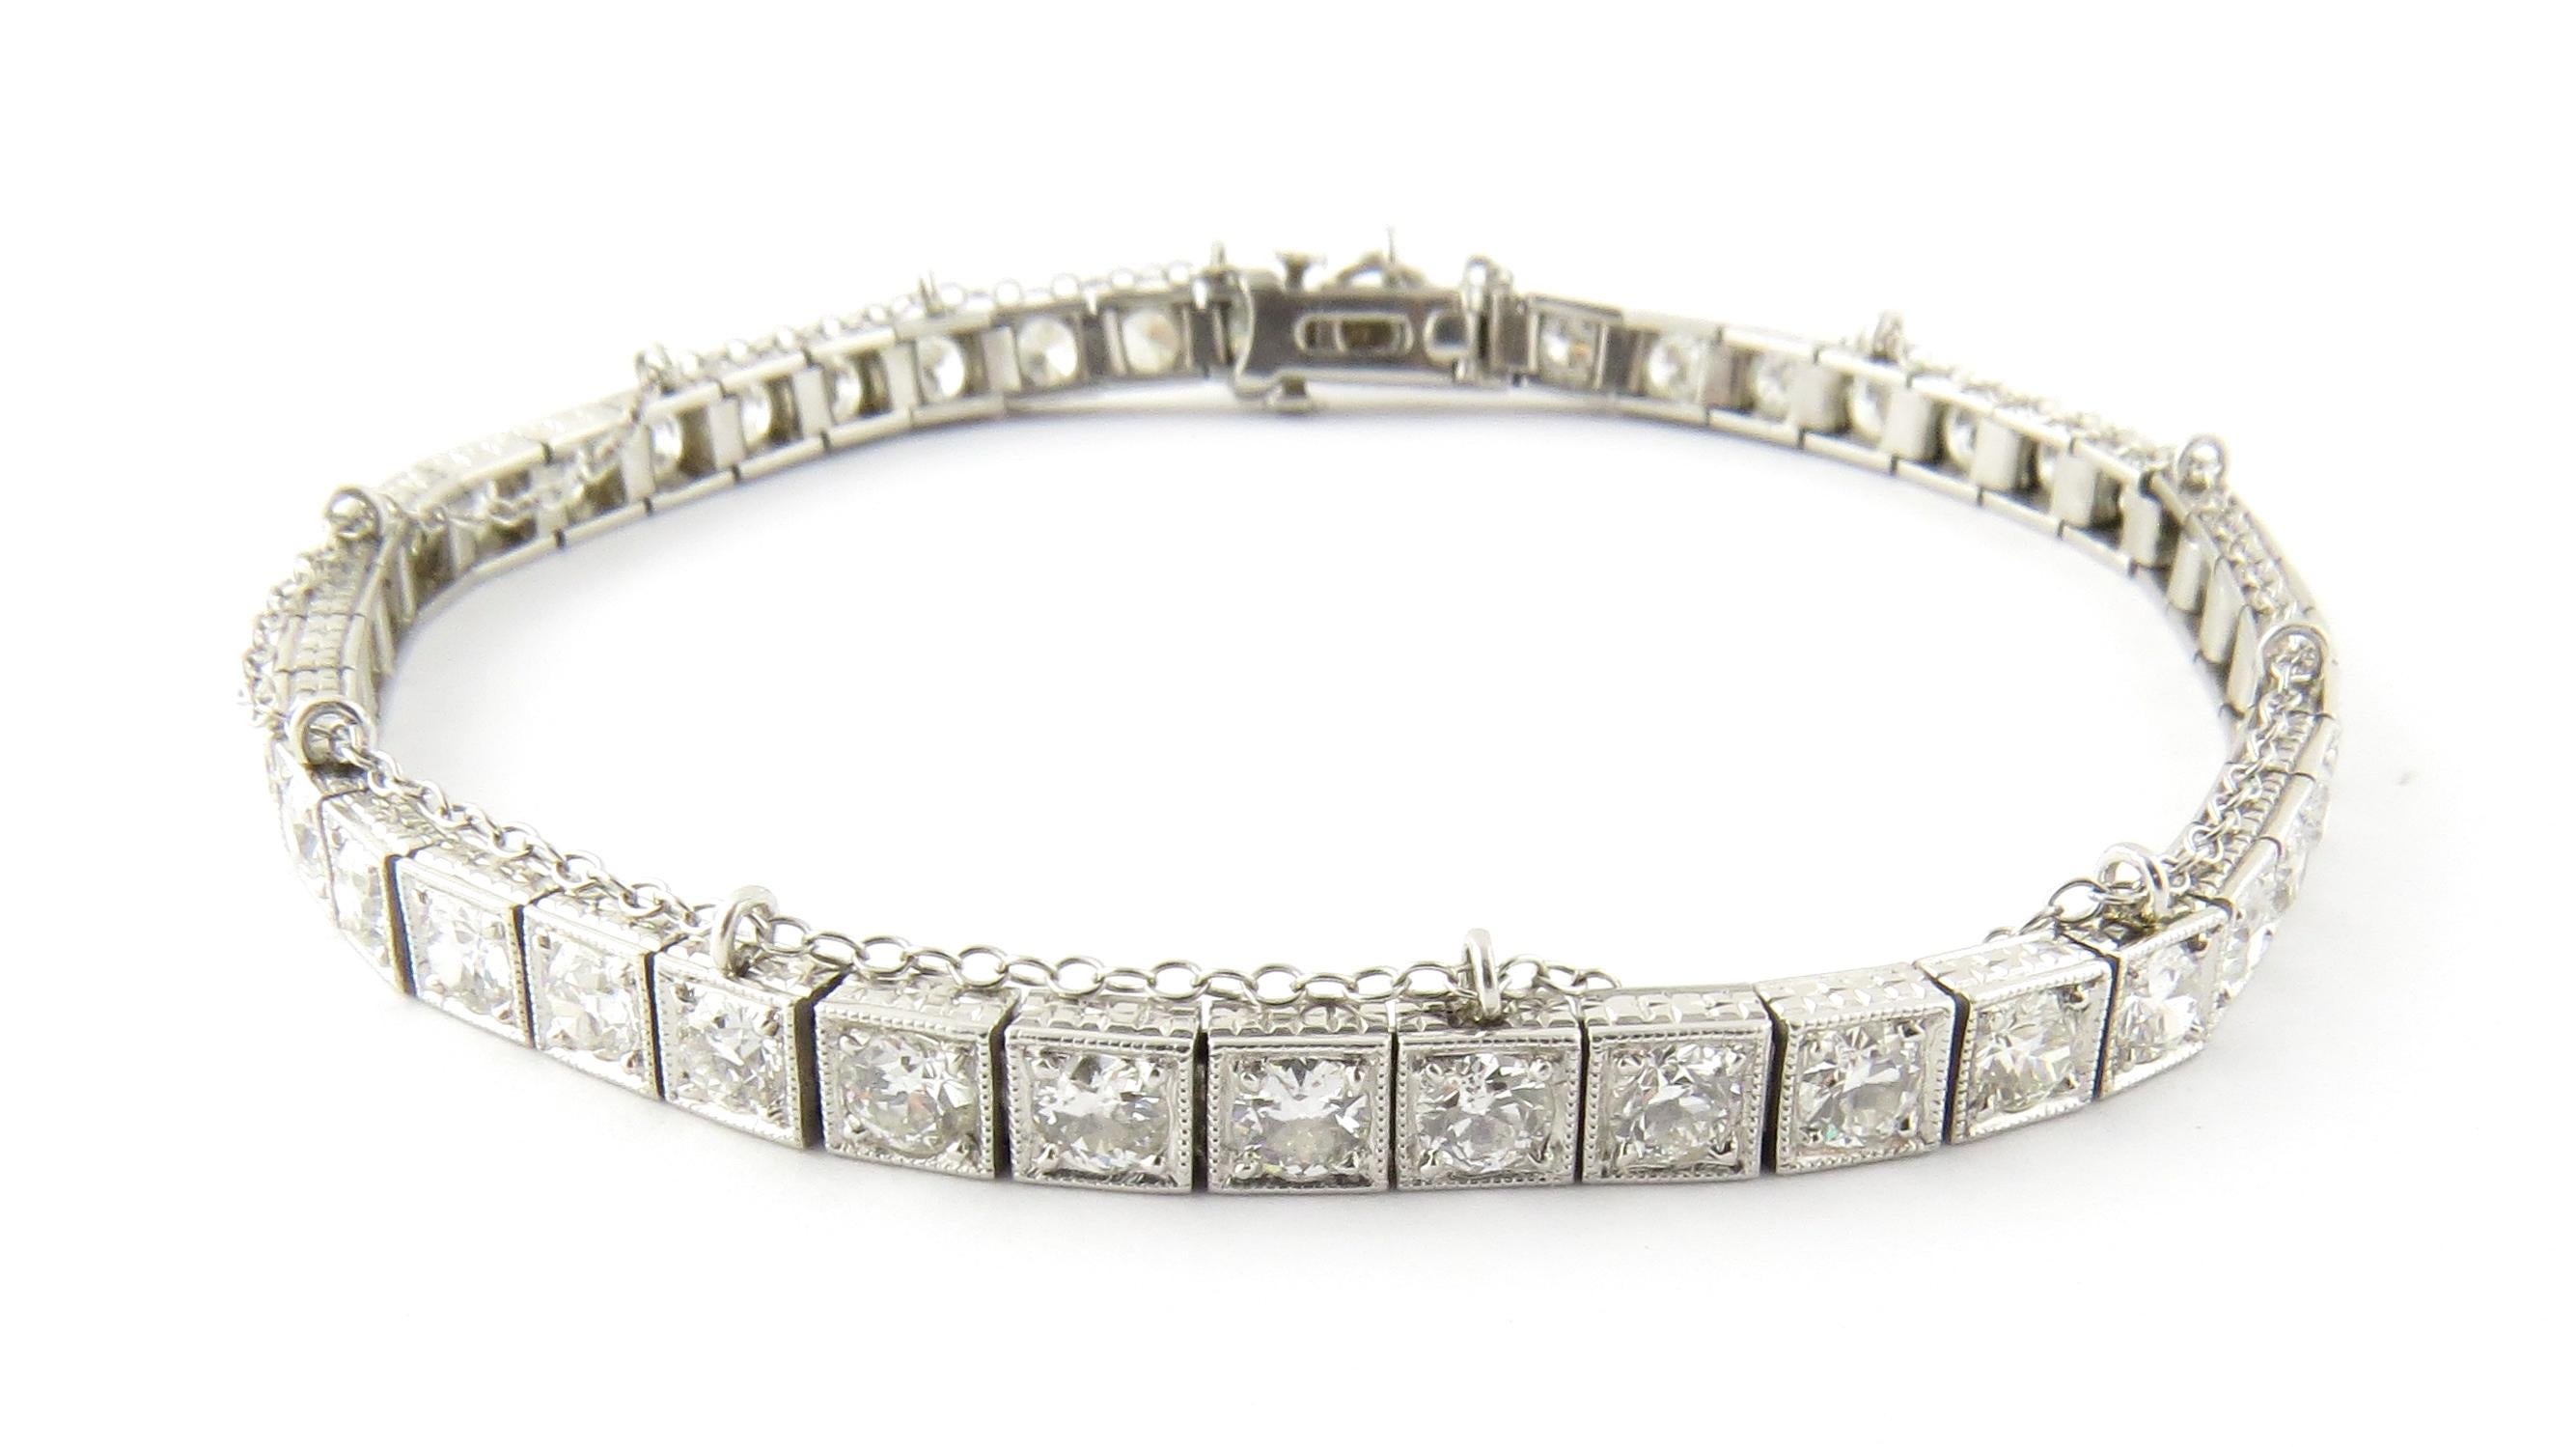 Antique Platinum Diamond Tennis Bracelet 

This gorgeous bracelet is full of sparkle containing 44 diamonds each approx .10 ct each for a total ct weight of 4.4 cts 

Safety chain runs throughout

Chain is 10K White Gold

Bracelet marked PLAT

20.3